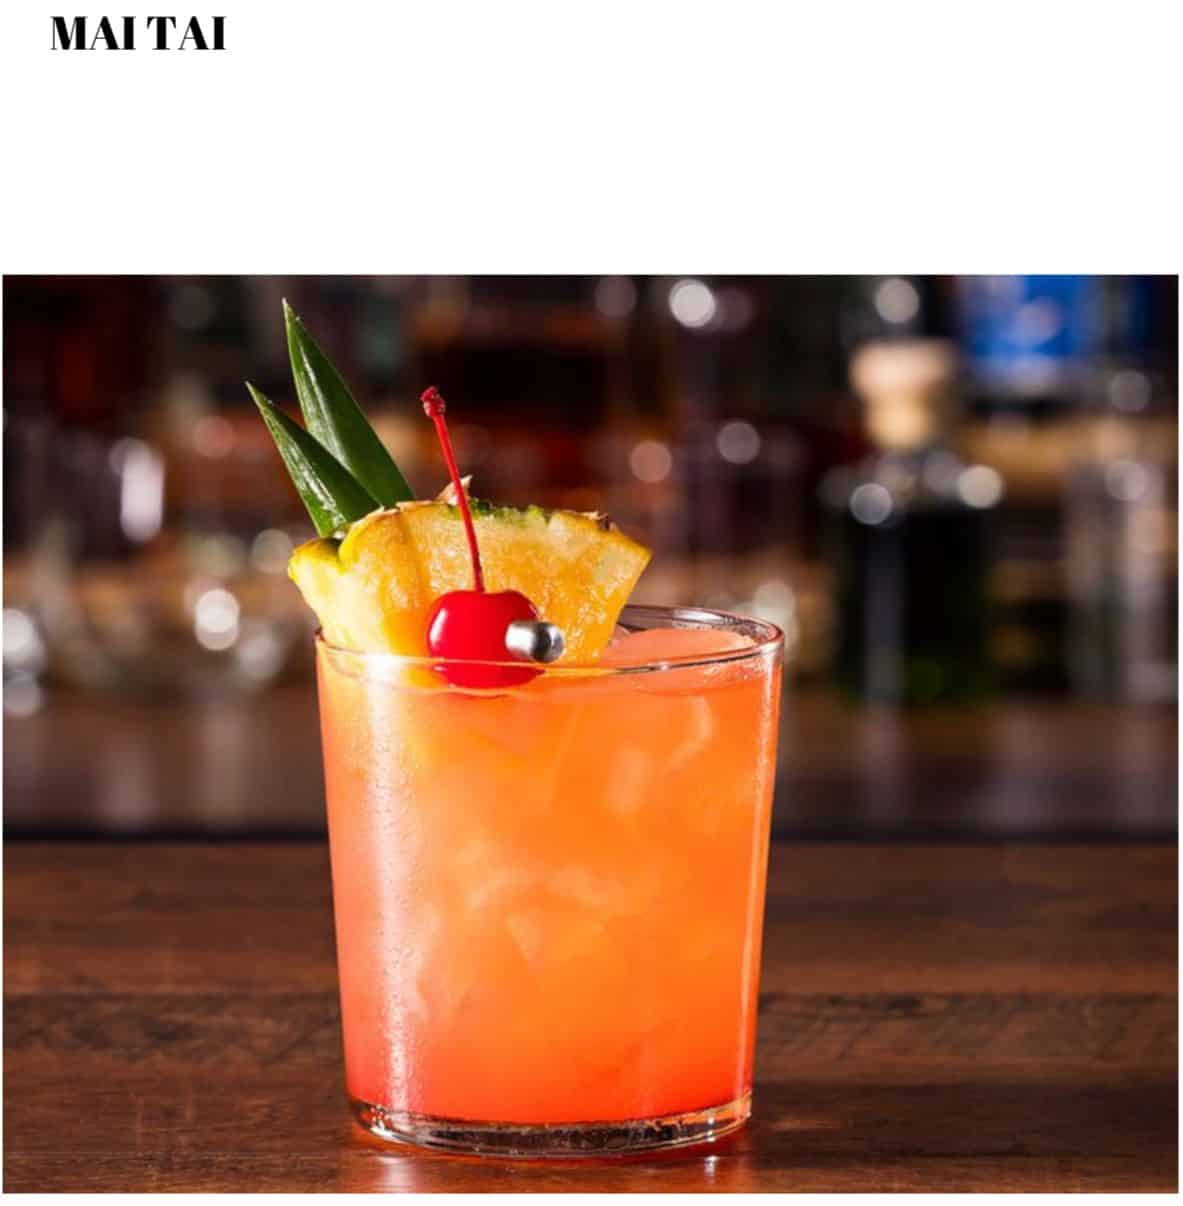 A cocktail with a pineapple garnish on top.